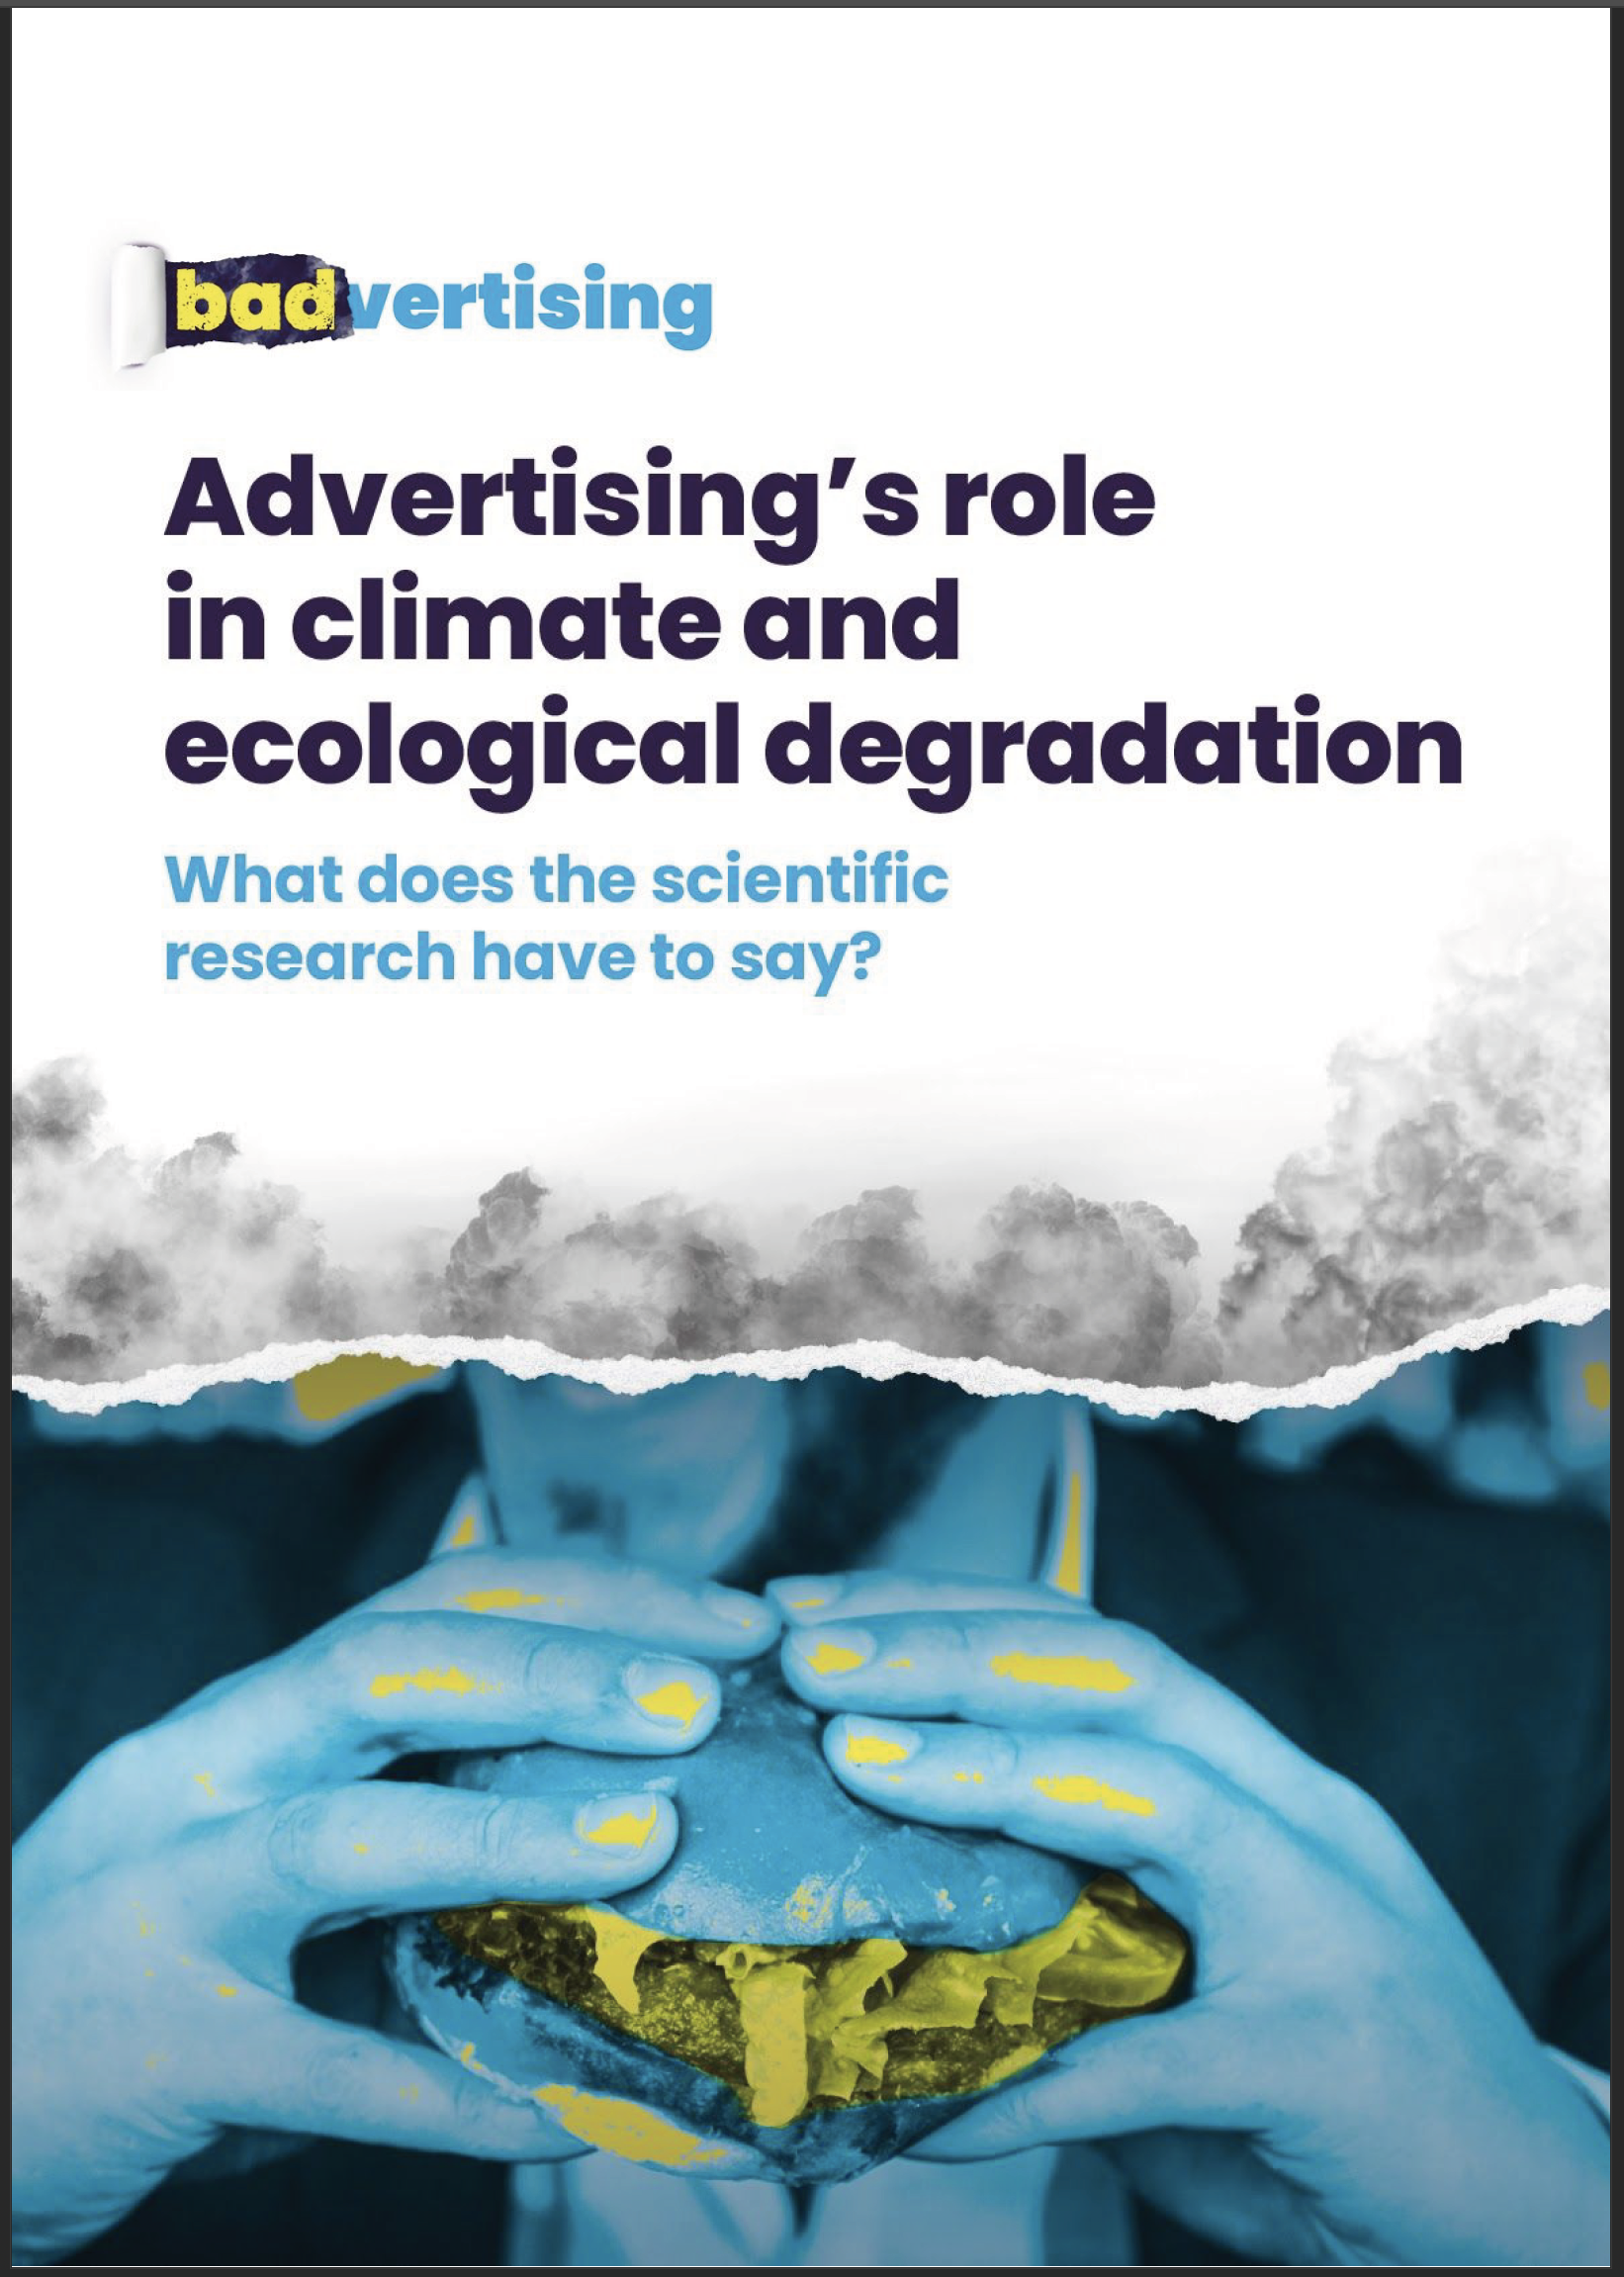 Advertisings role in climate and ecological destruction